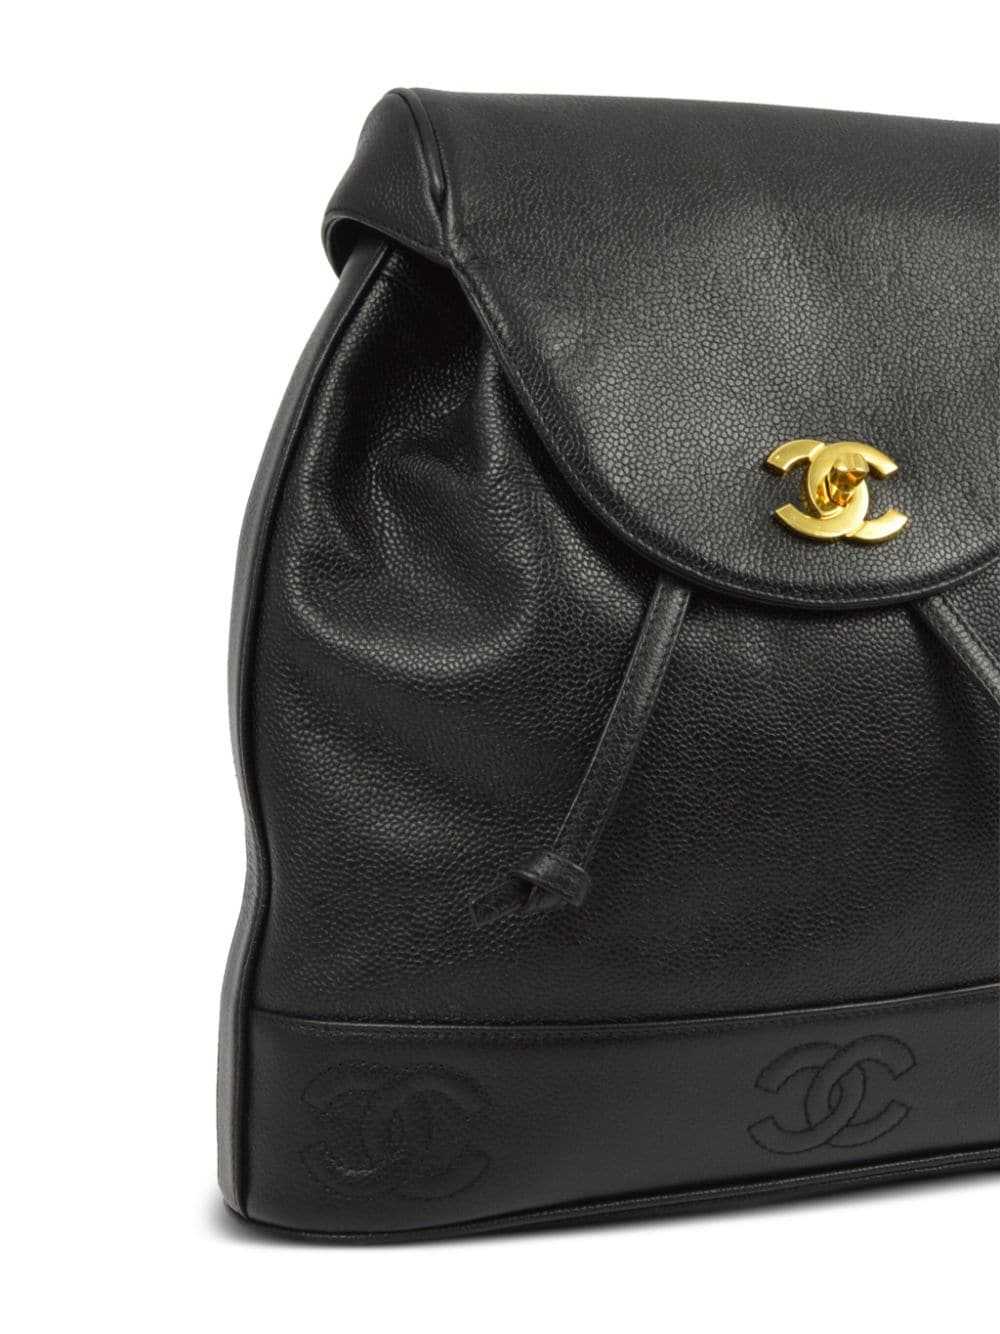 CHANEL Pre-Owned 1997 Triple CC backpack - Black - image 3